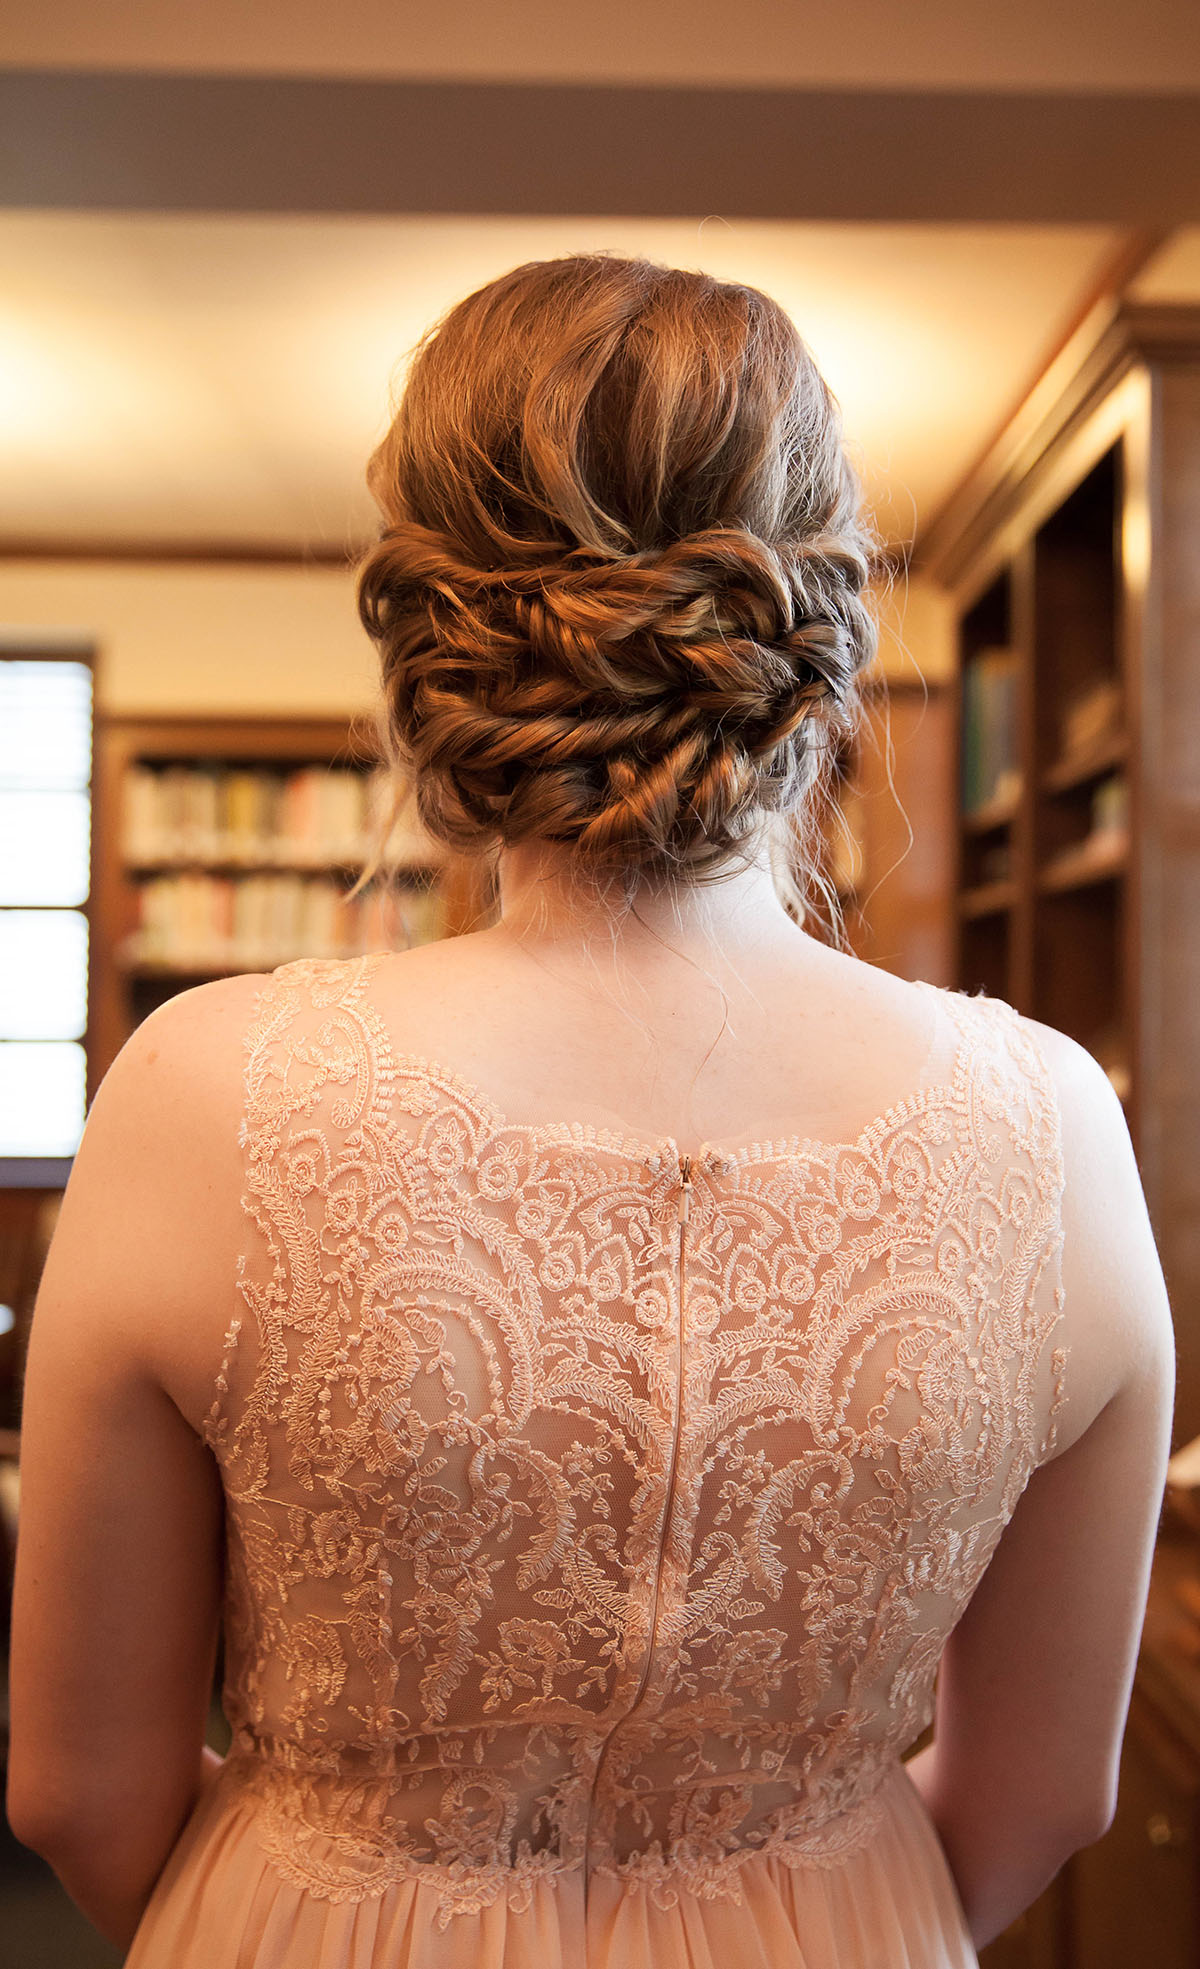 Church wedding with traditional Mississippi roots hairstyle hair inspiration